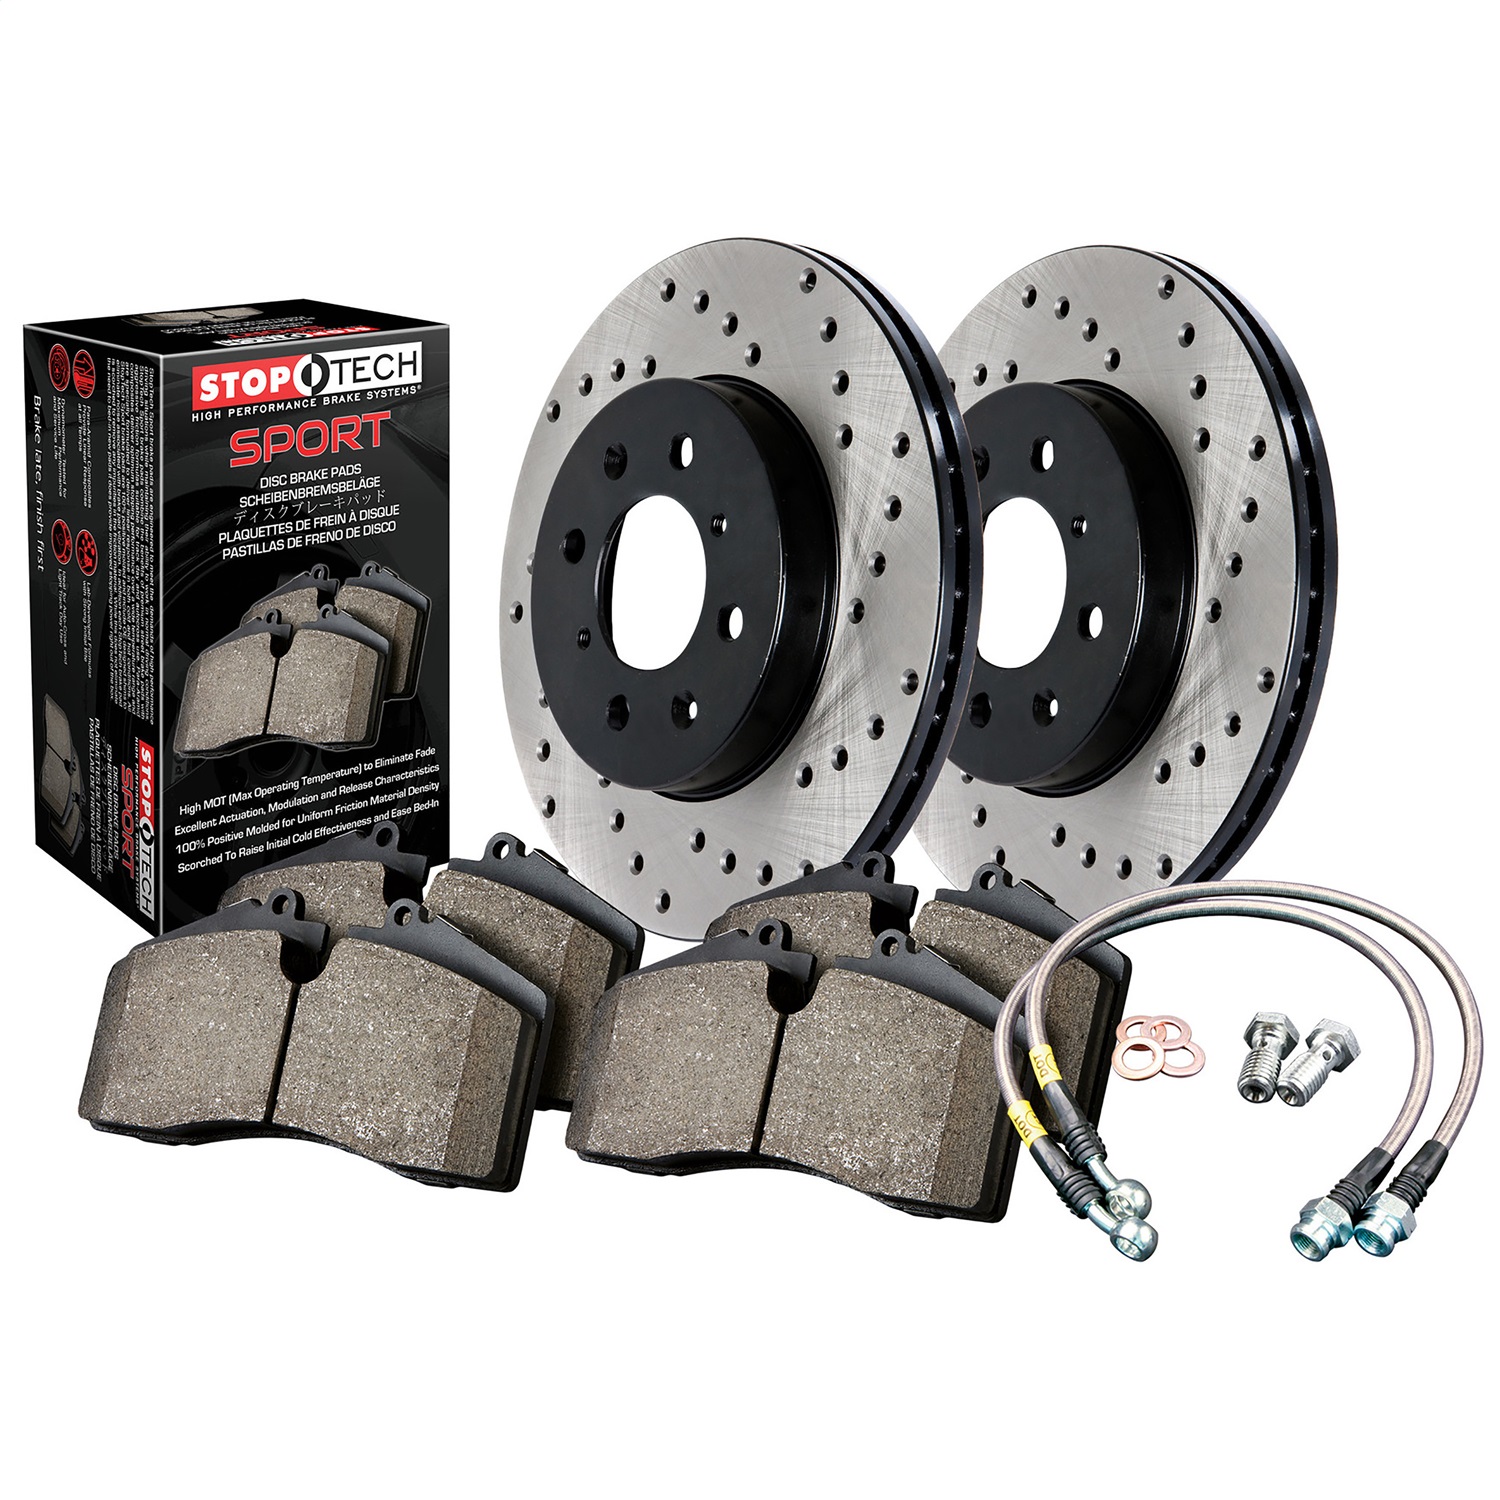 StopTech 979.40008F Sport Disc Brake Kit w/Cross-Drilled Rotor Fits Civic CSX